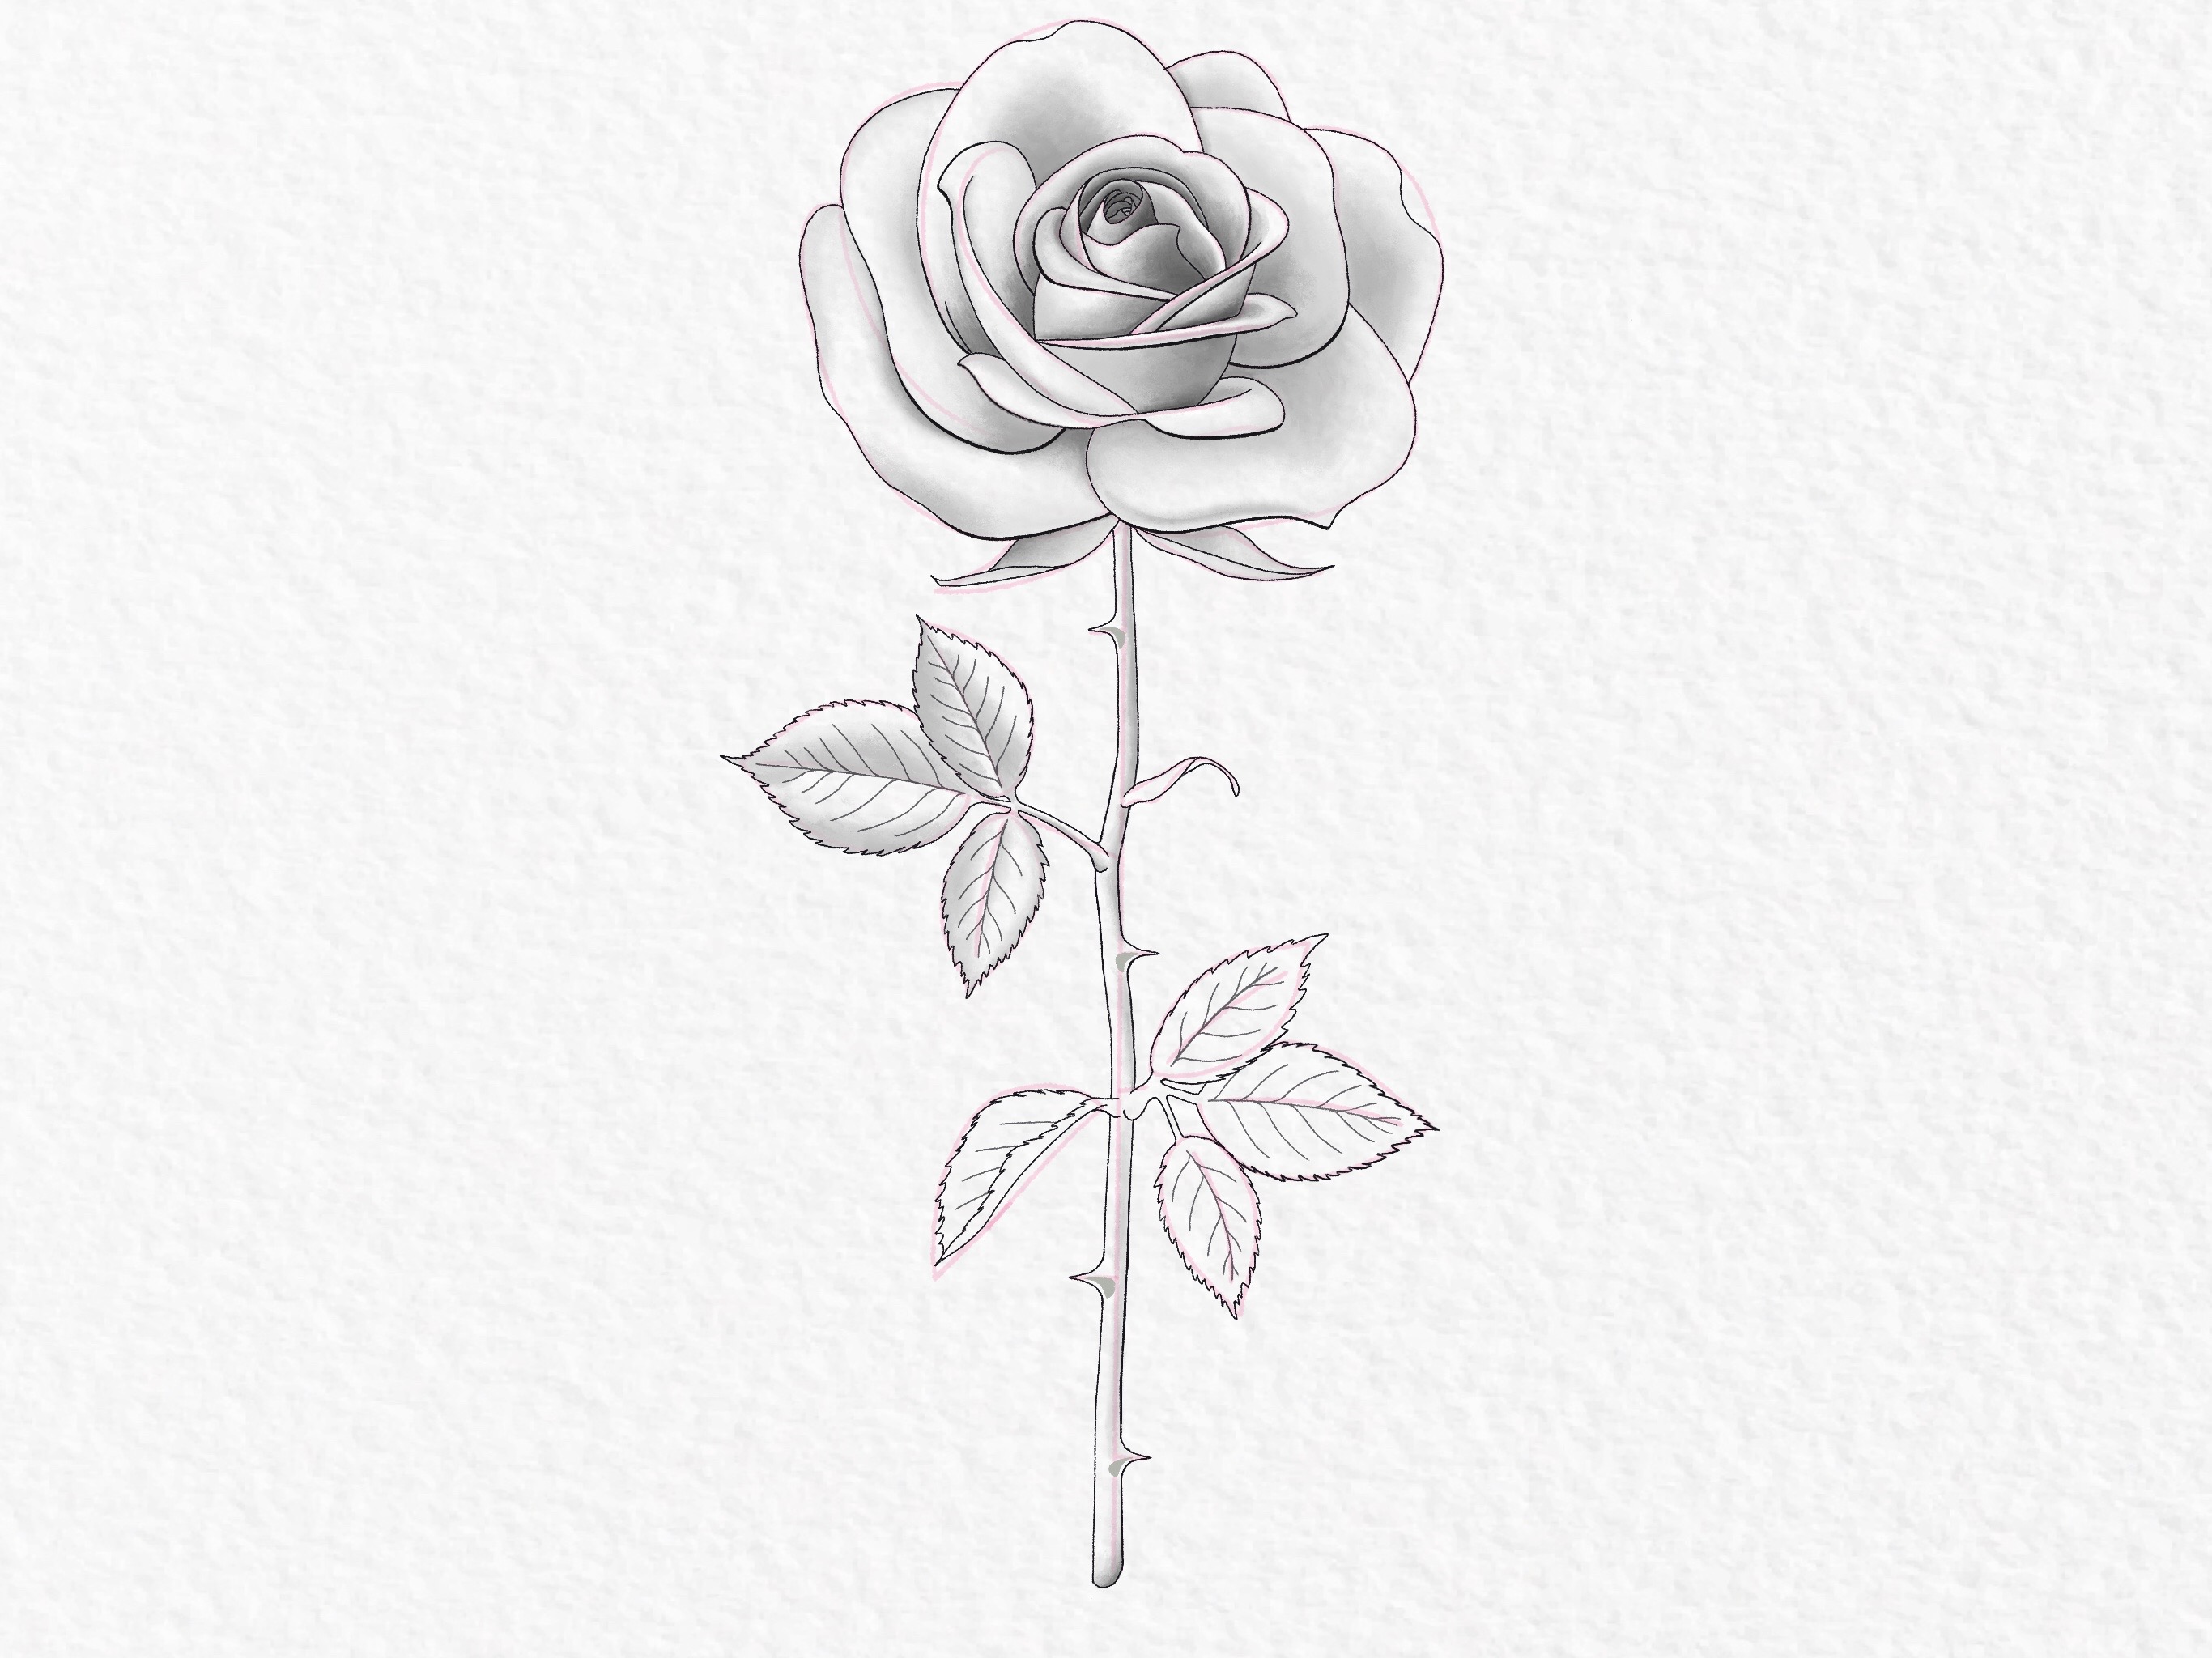 How to draw a rose, step by step drawing tutorial - step 48